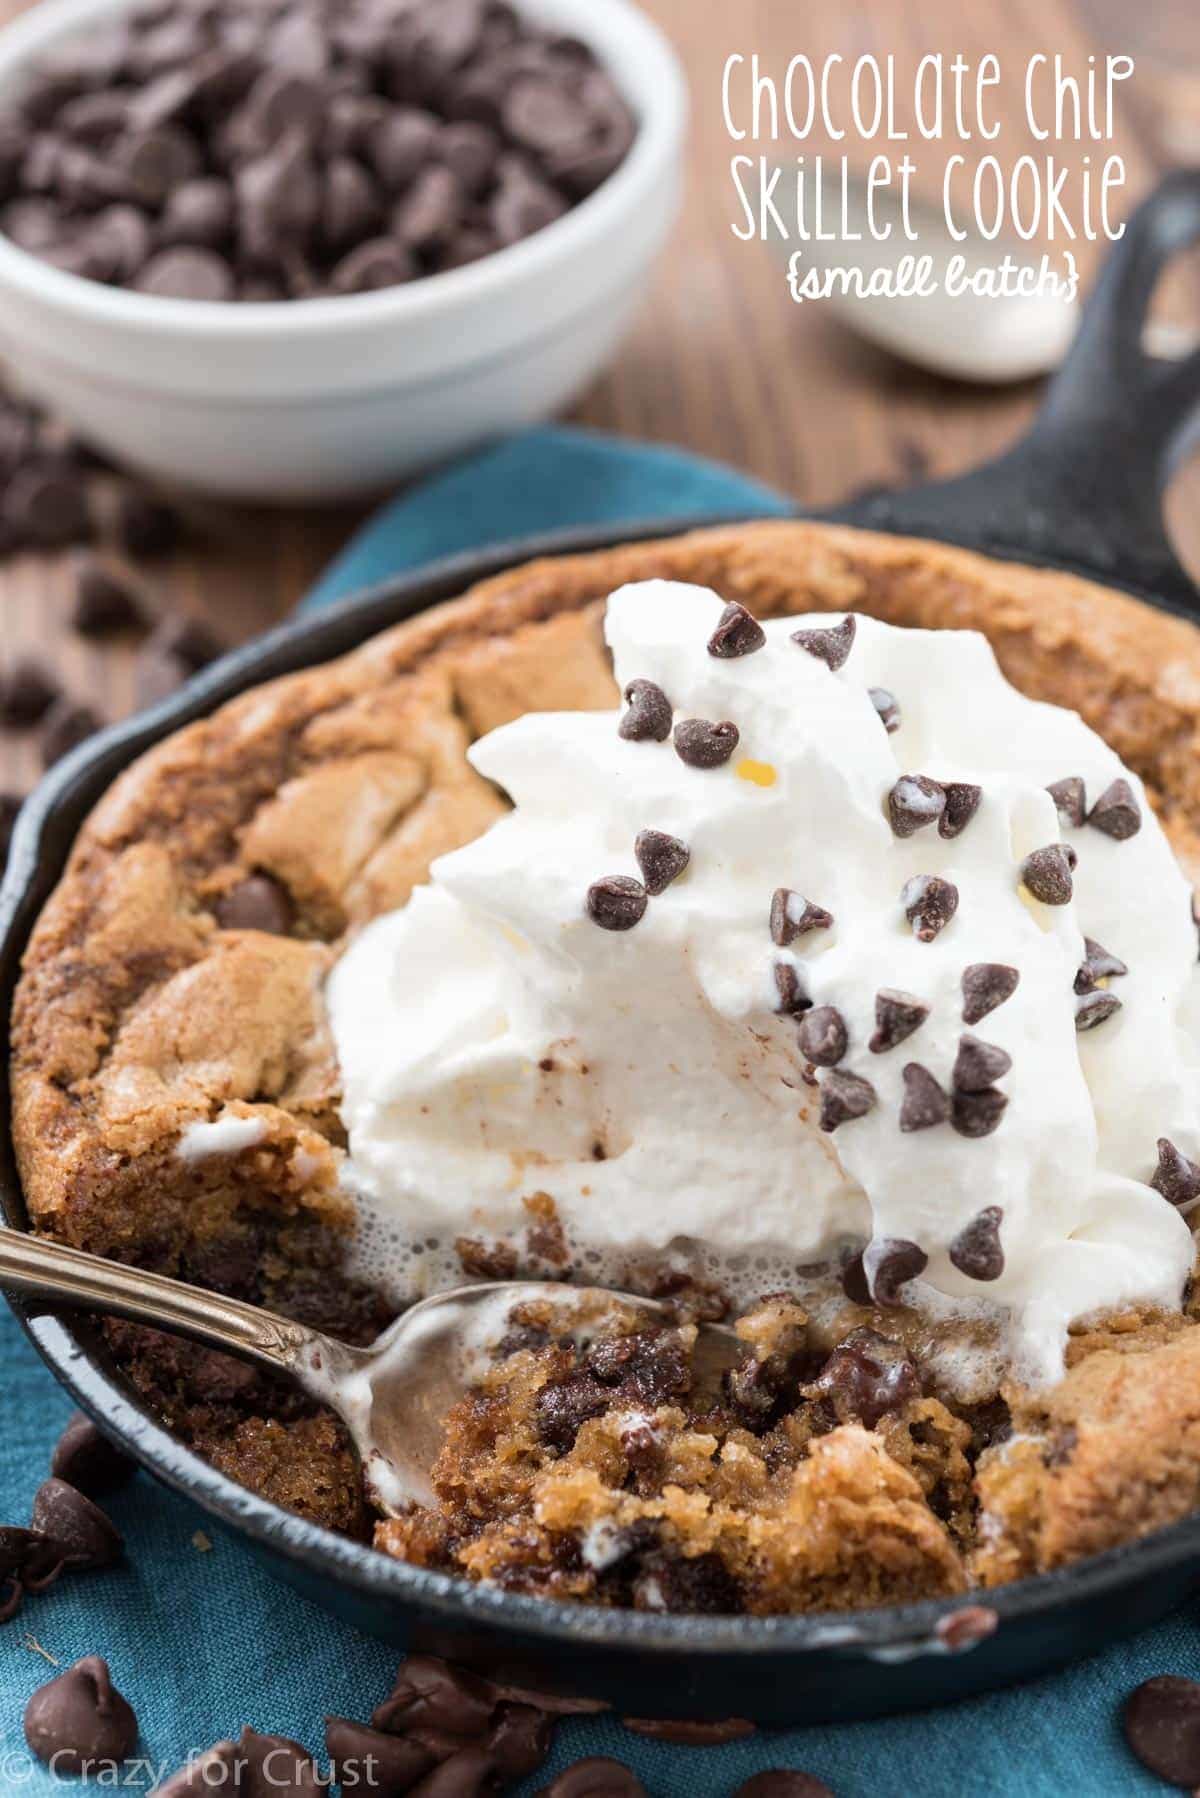 Skillet Chocolate Chip Cookie (8 of 14)w